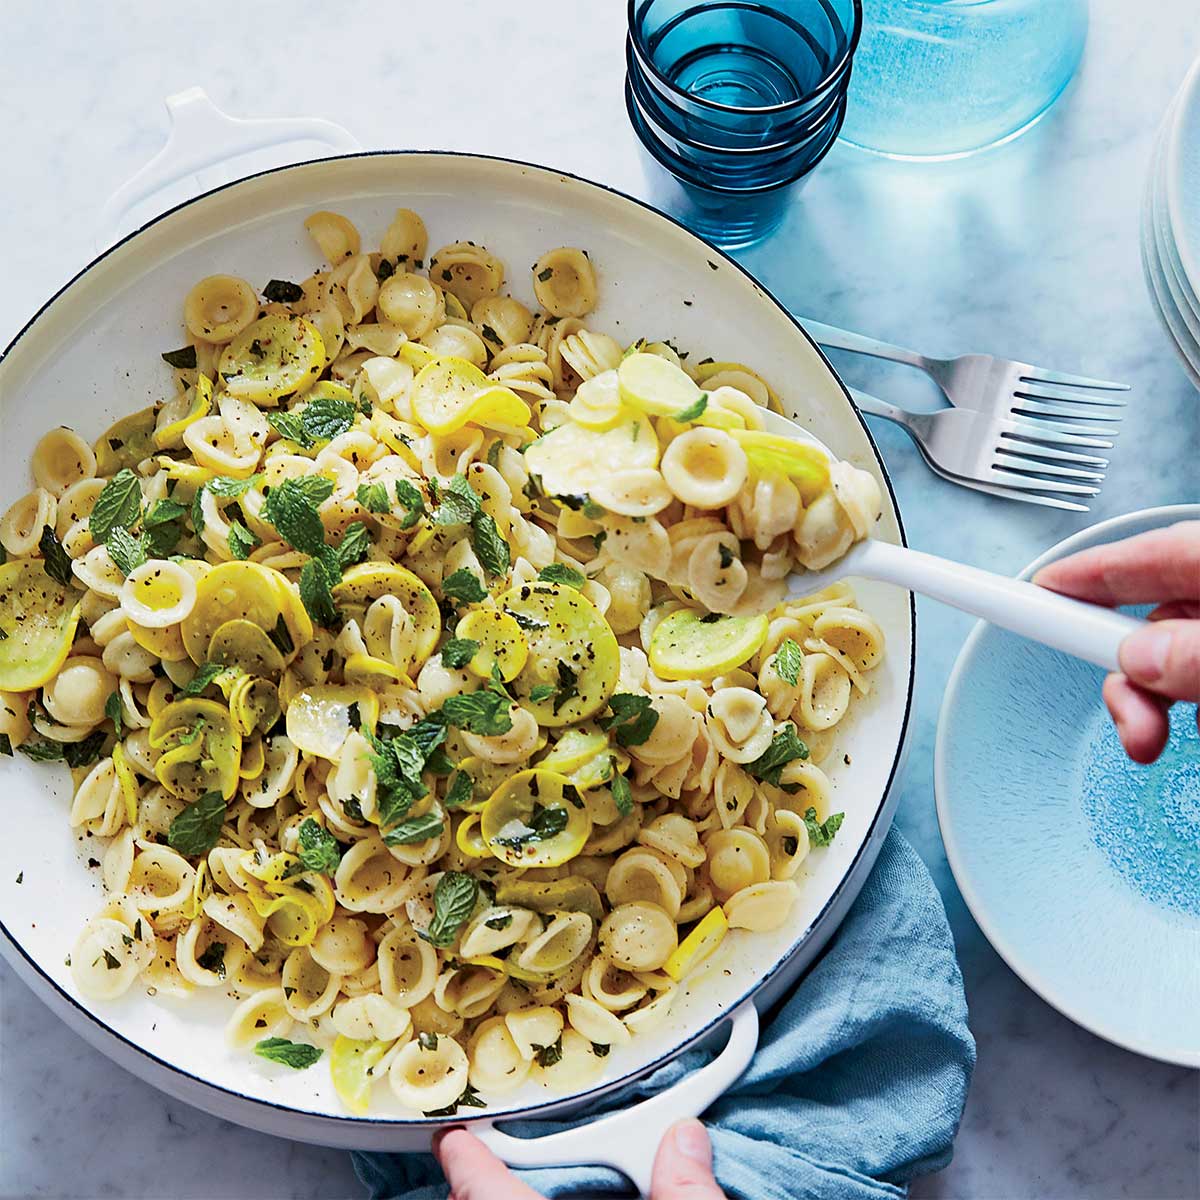 Orecchiette with Summer Squash, Mint, and Goat’s Cheese